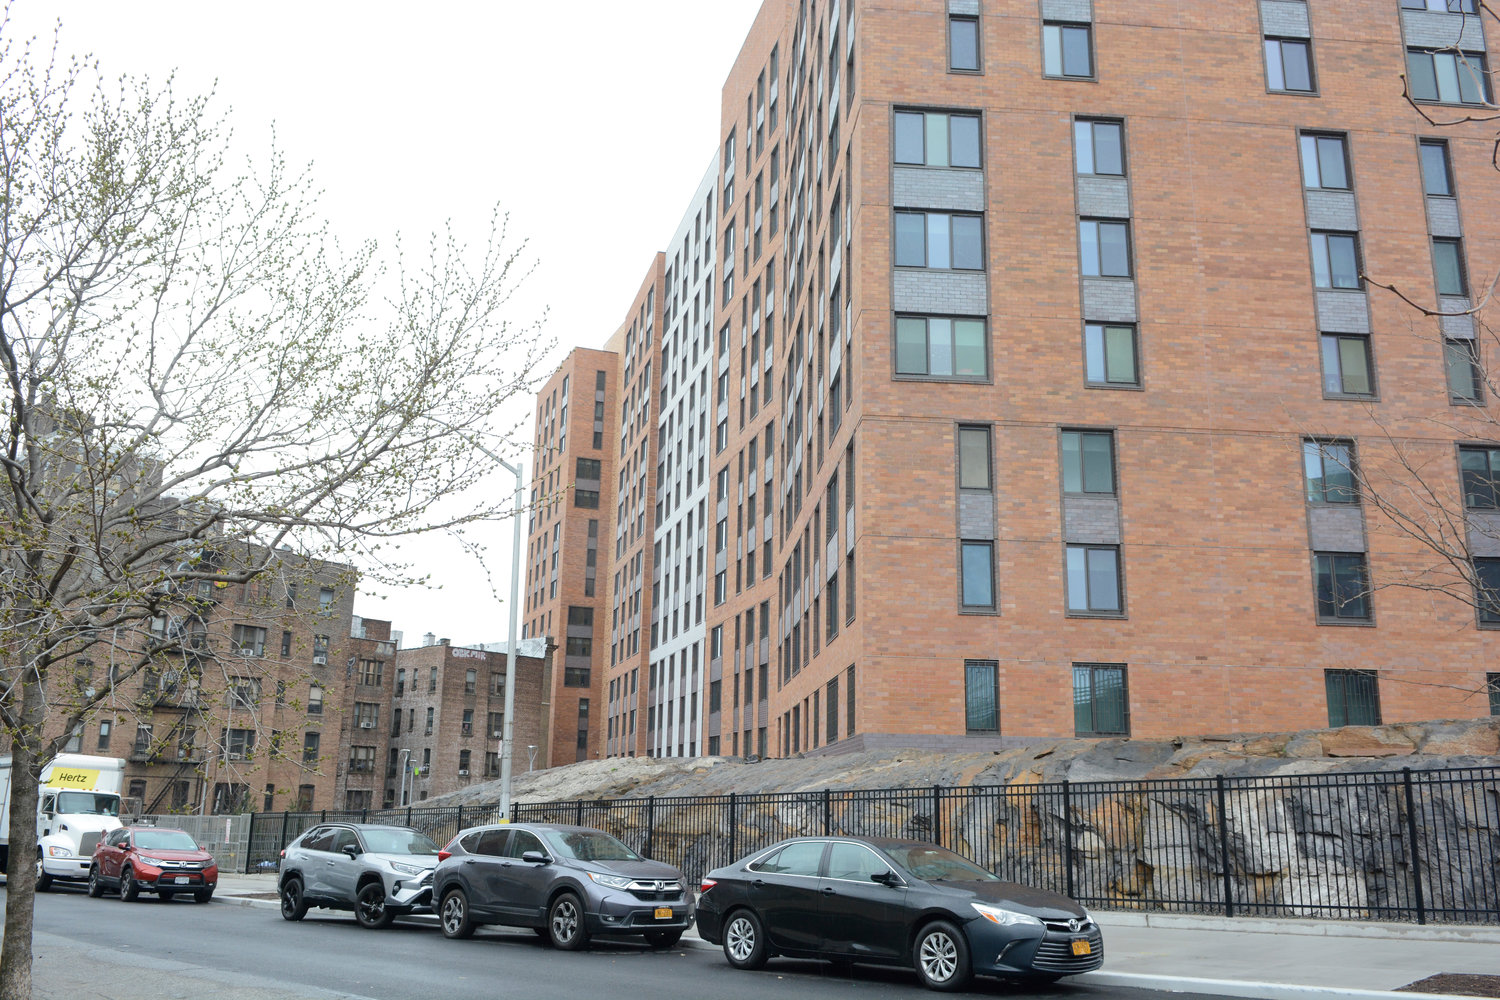 The newly opened 319-unit Second Farms housing site in the Bronx for low-income individuals and families.